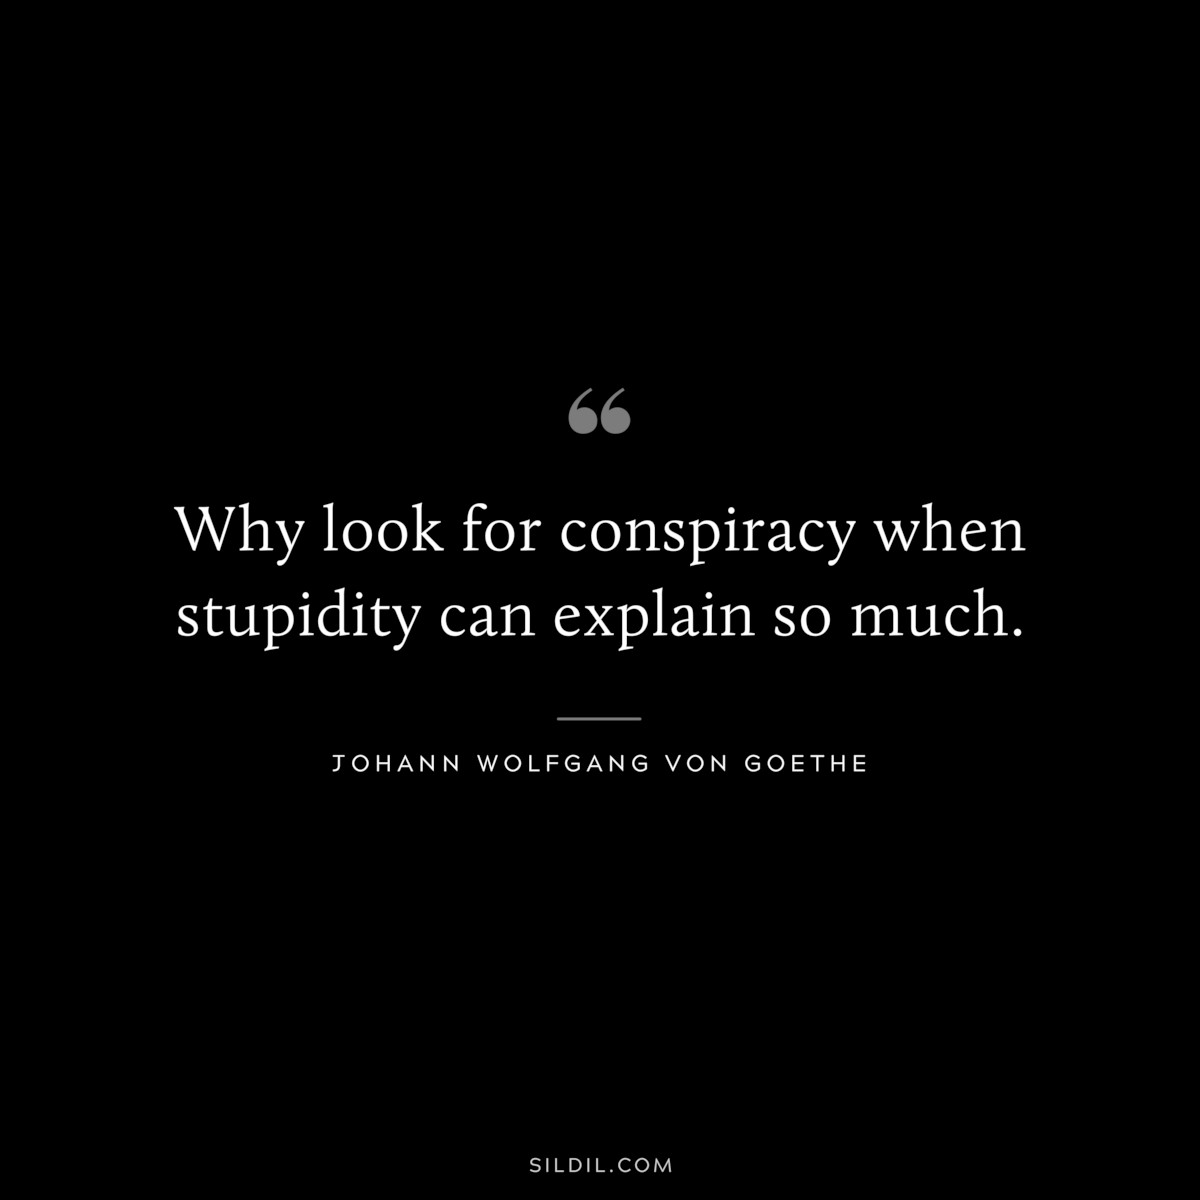 Why look for conspiracy when stupidity can explain so much.― Johann Wolfgang von Goethe